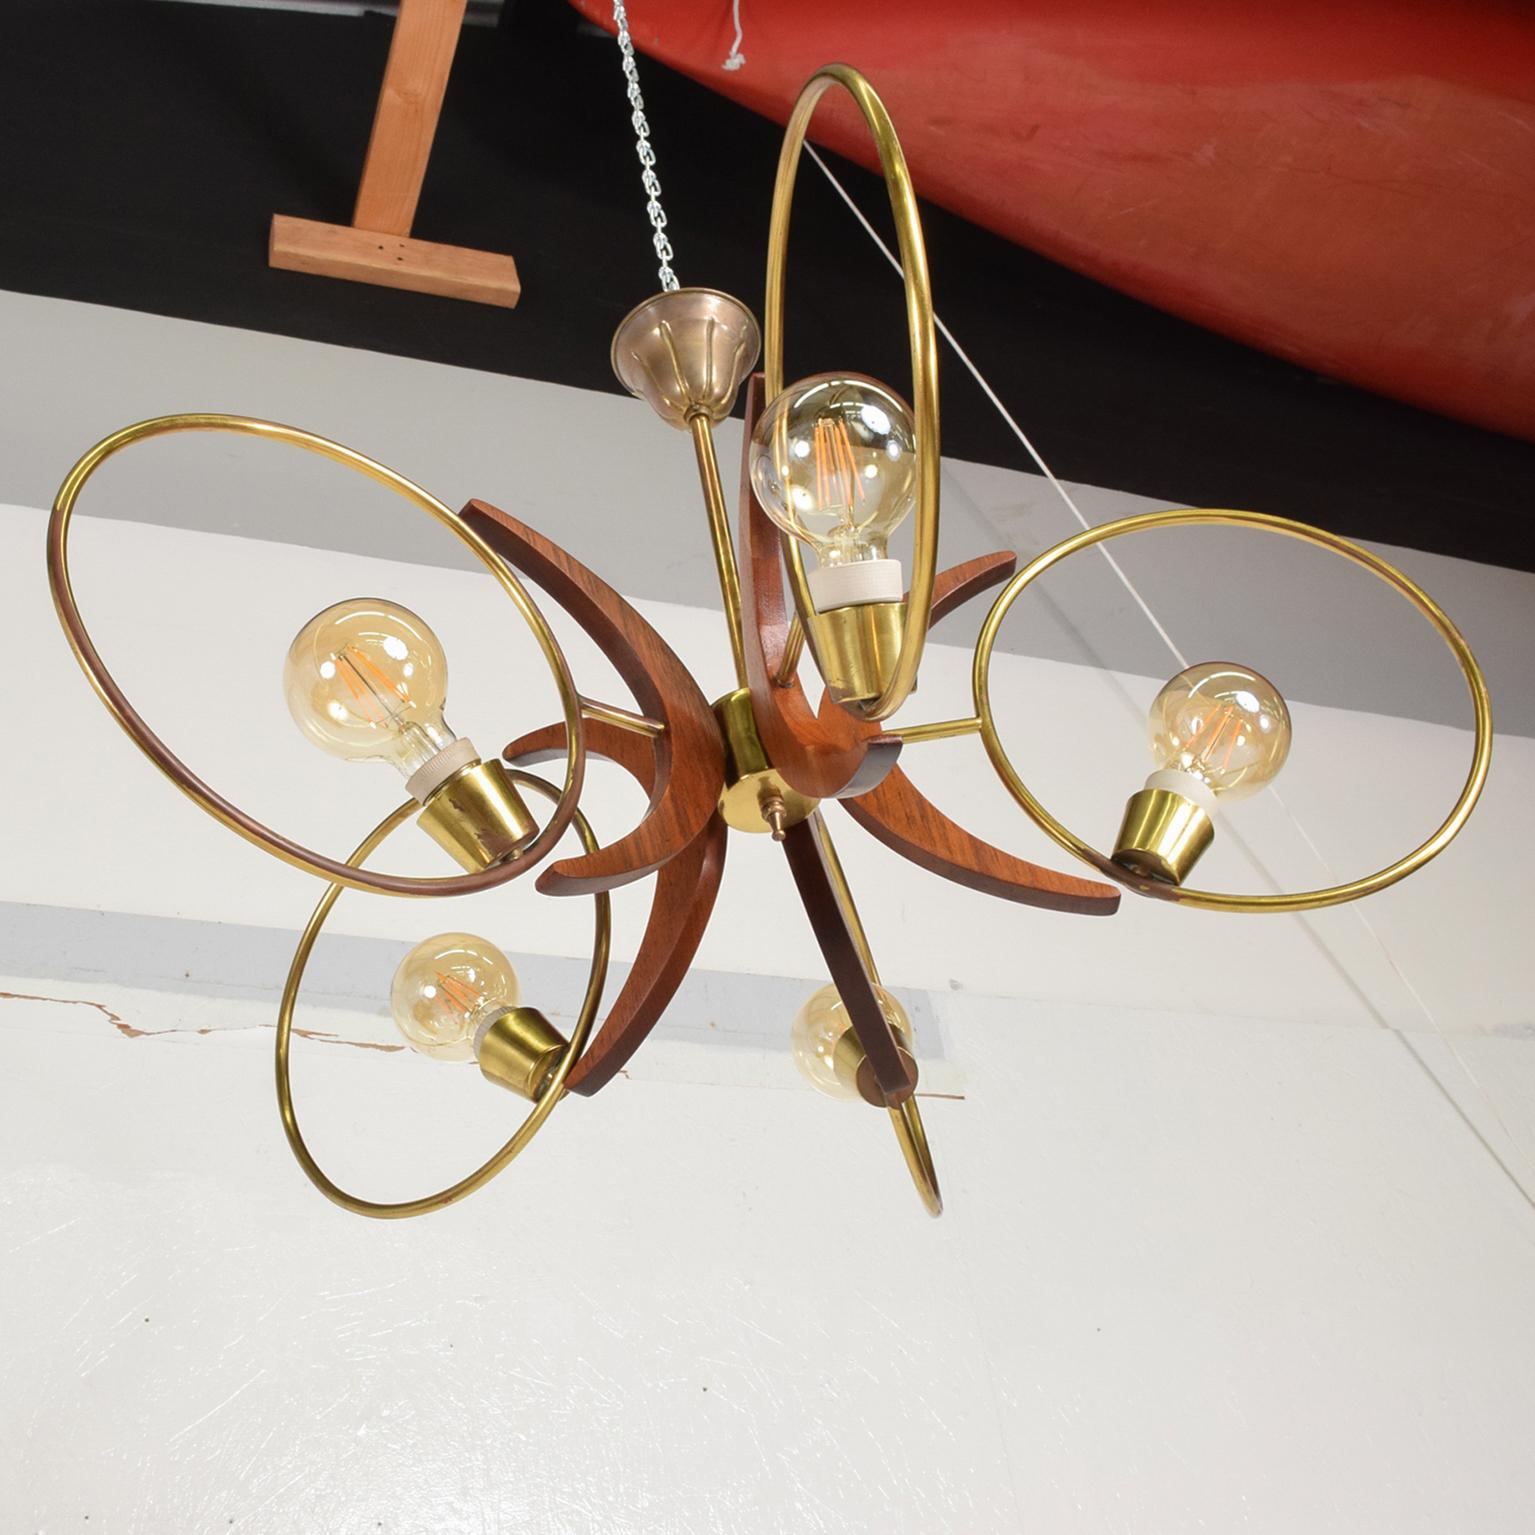 1960s Alluring Five Ring Sculptural Chandelier Brass and Mahogany Mexico City For Sale 2